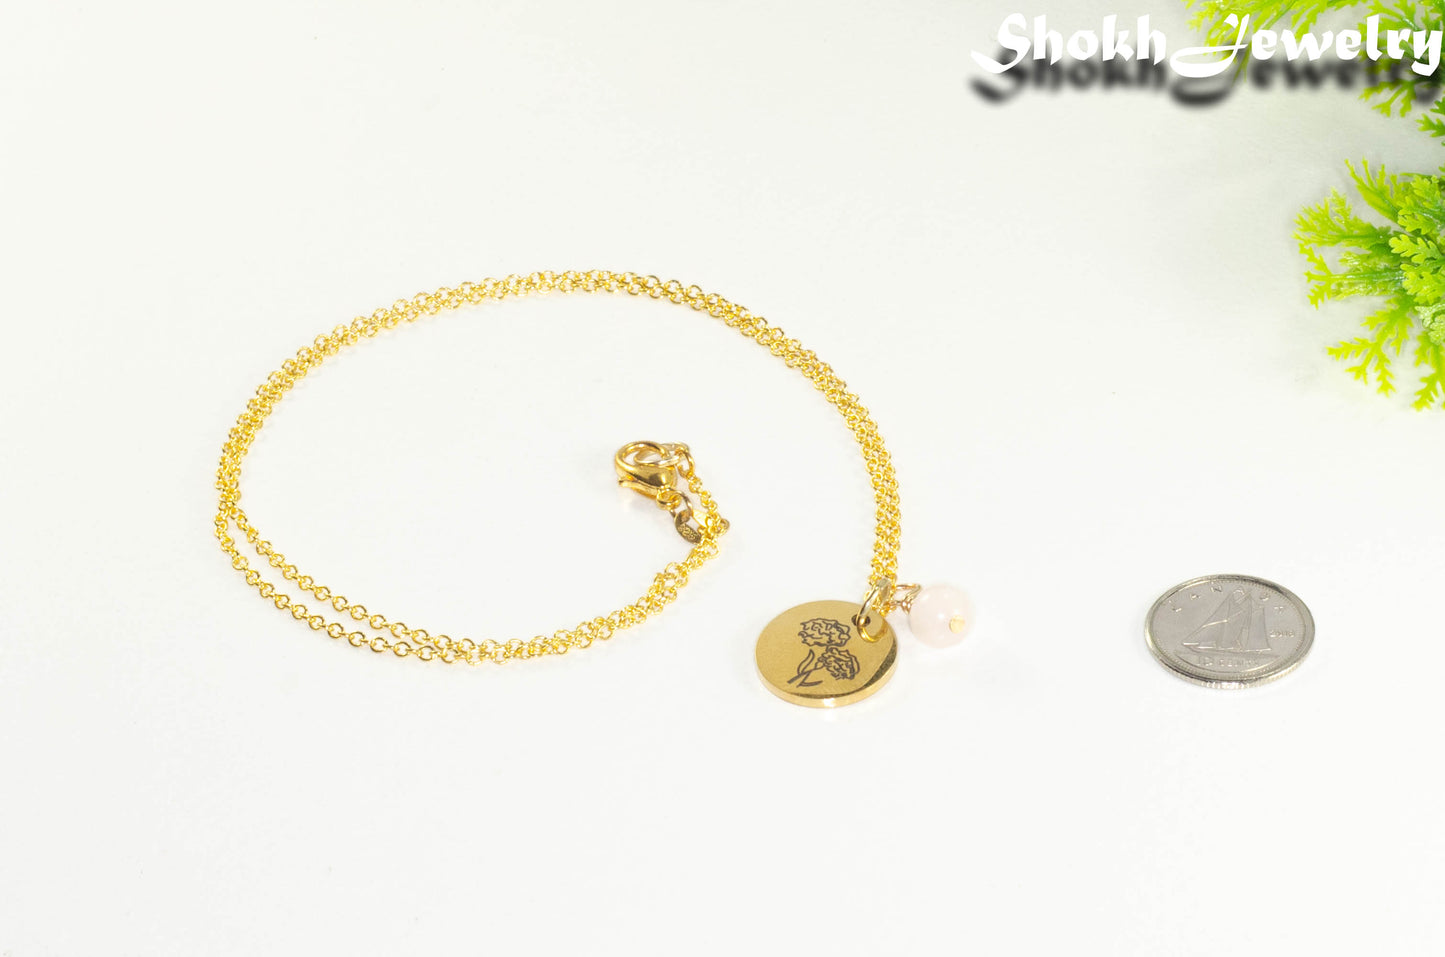 Gold Plated October Birth Flower Necklace with Rose Quartz Birthstone Pendant beside a dime.